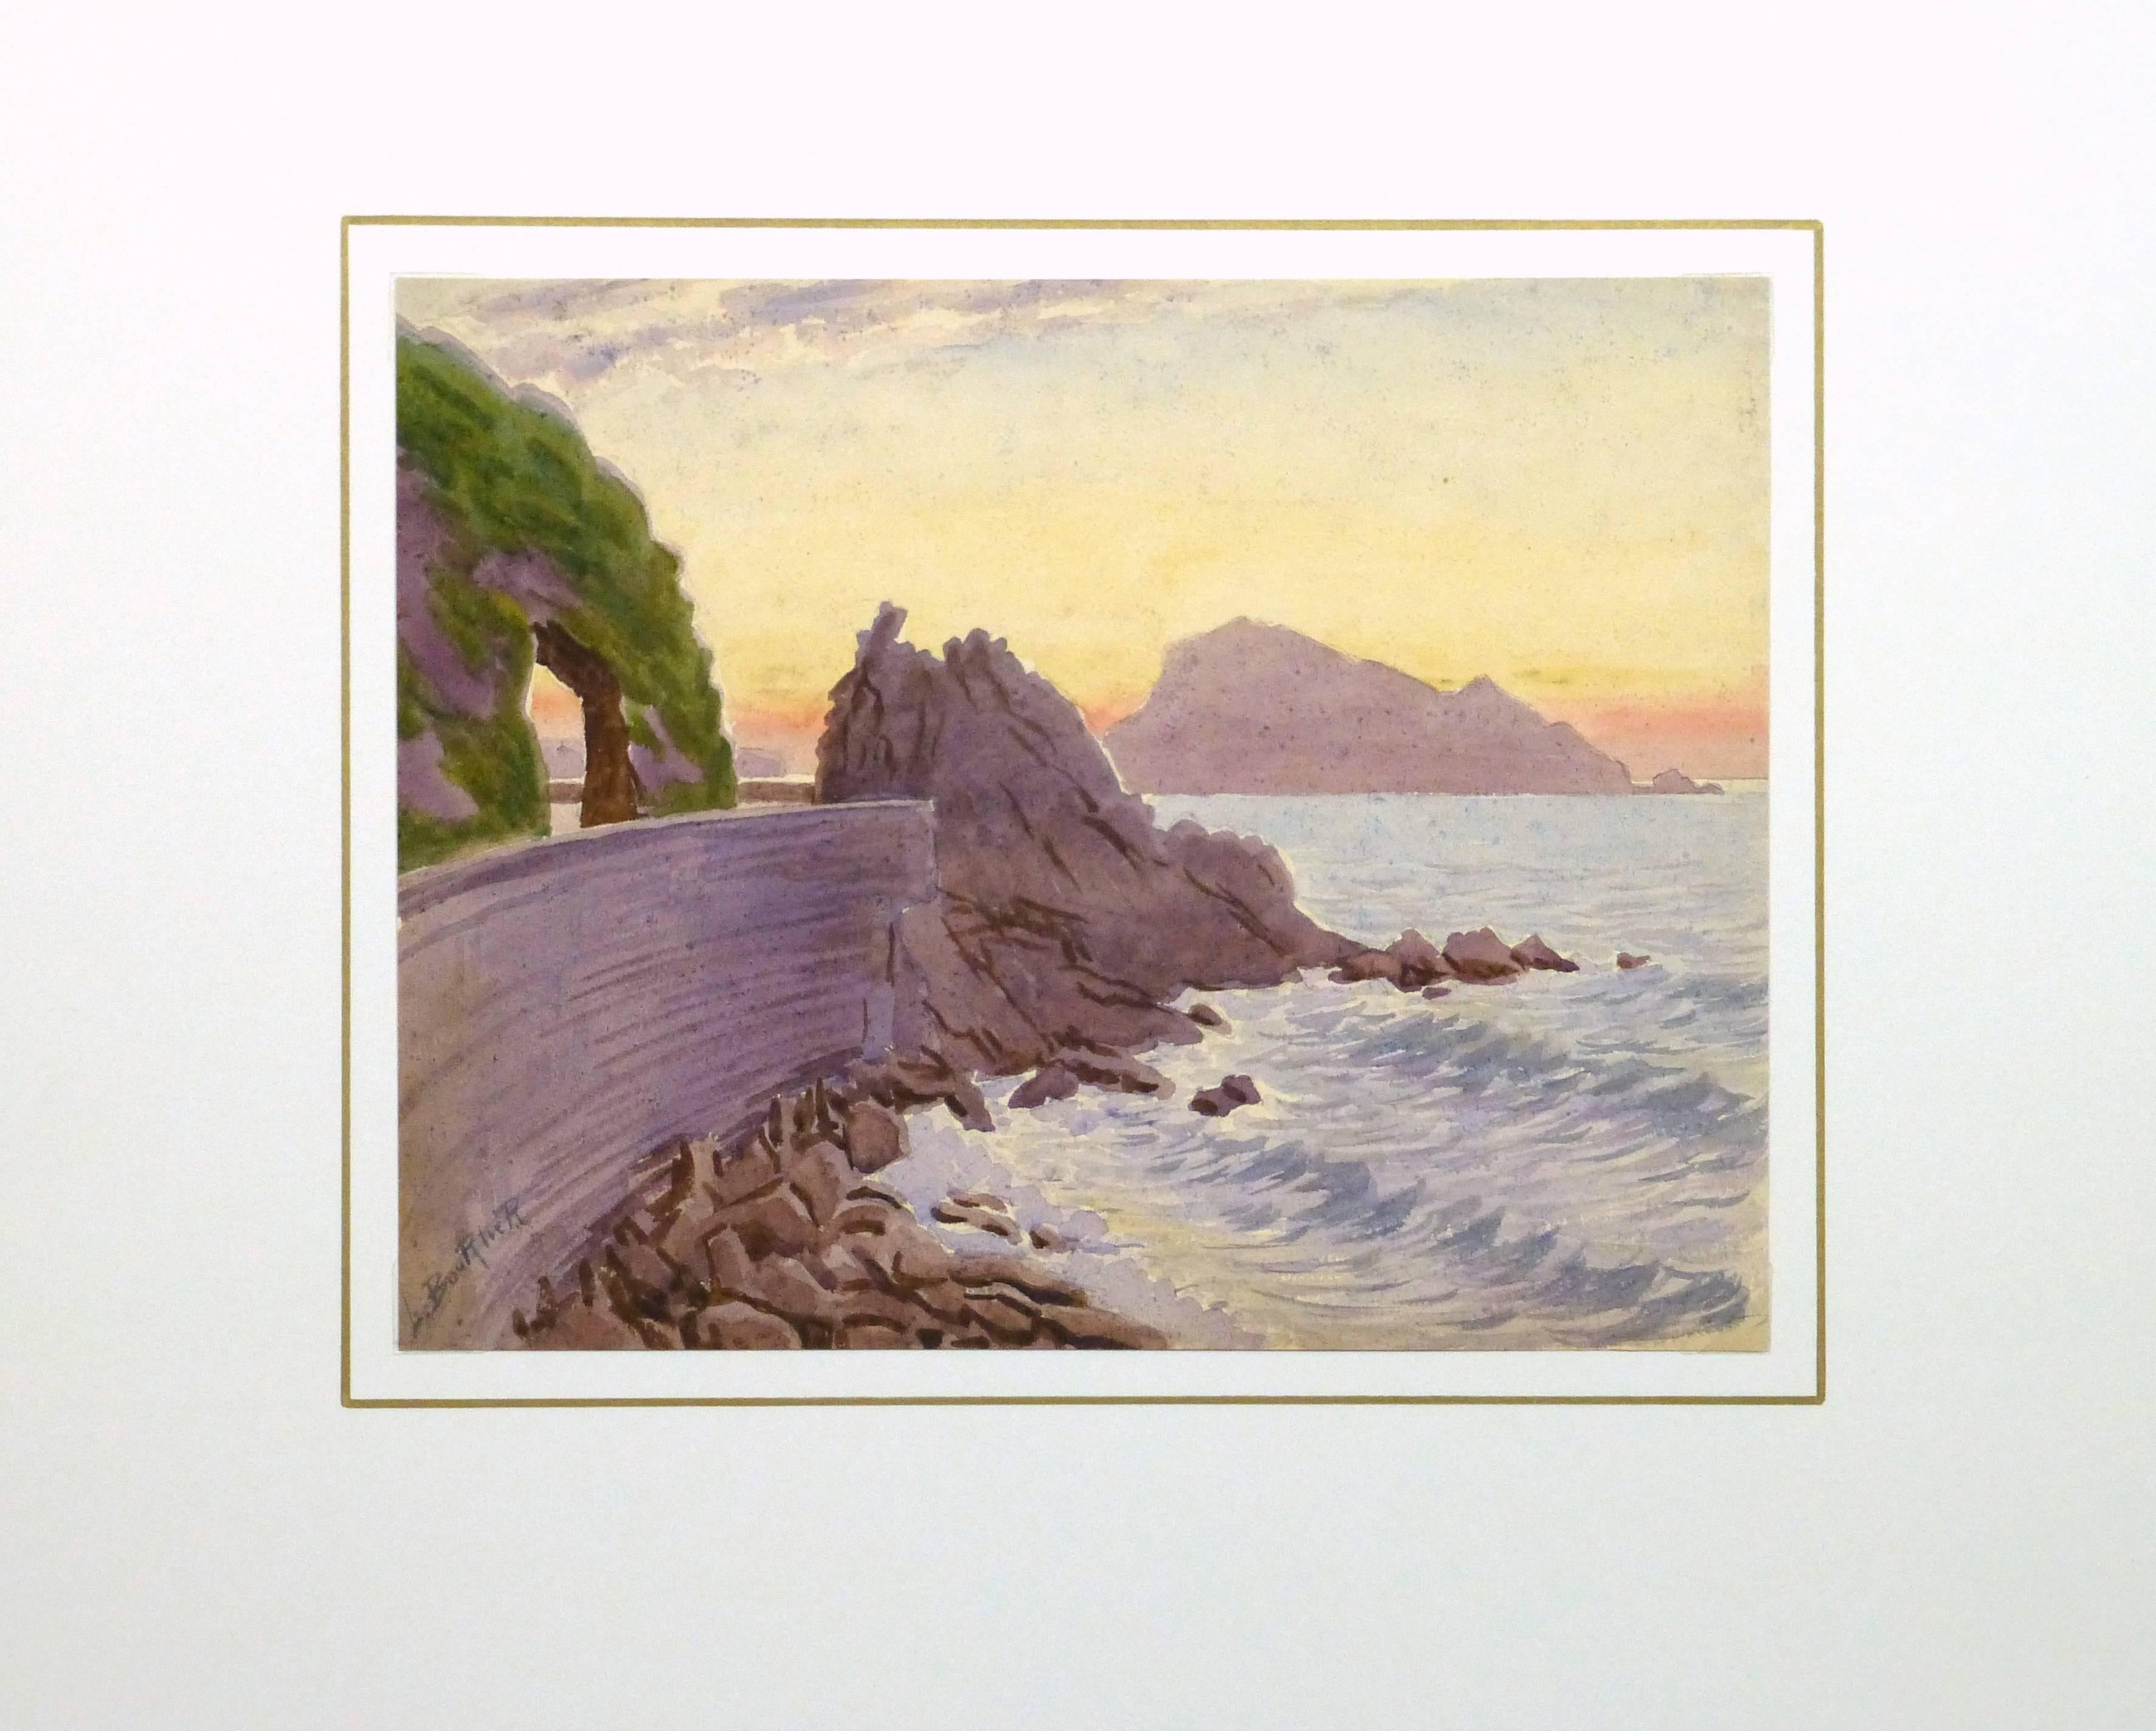 Striking watercolor of a beautiful sunset over a rocky shore along the French Riviera by French artist L. Bourlier, circa 1920. Signed lower left. 

Original artwork on paper displayed on a white mat with a gold border. Mat fits a standard-size